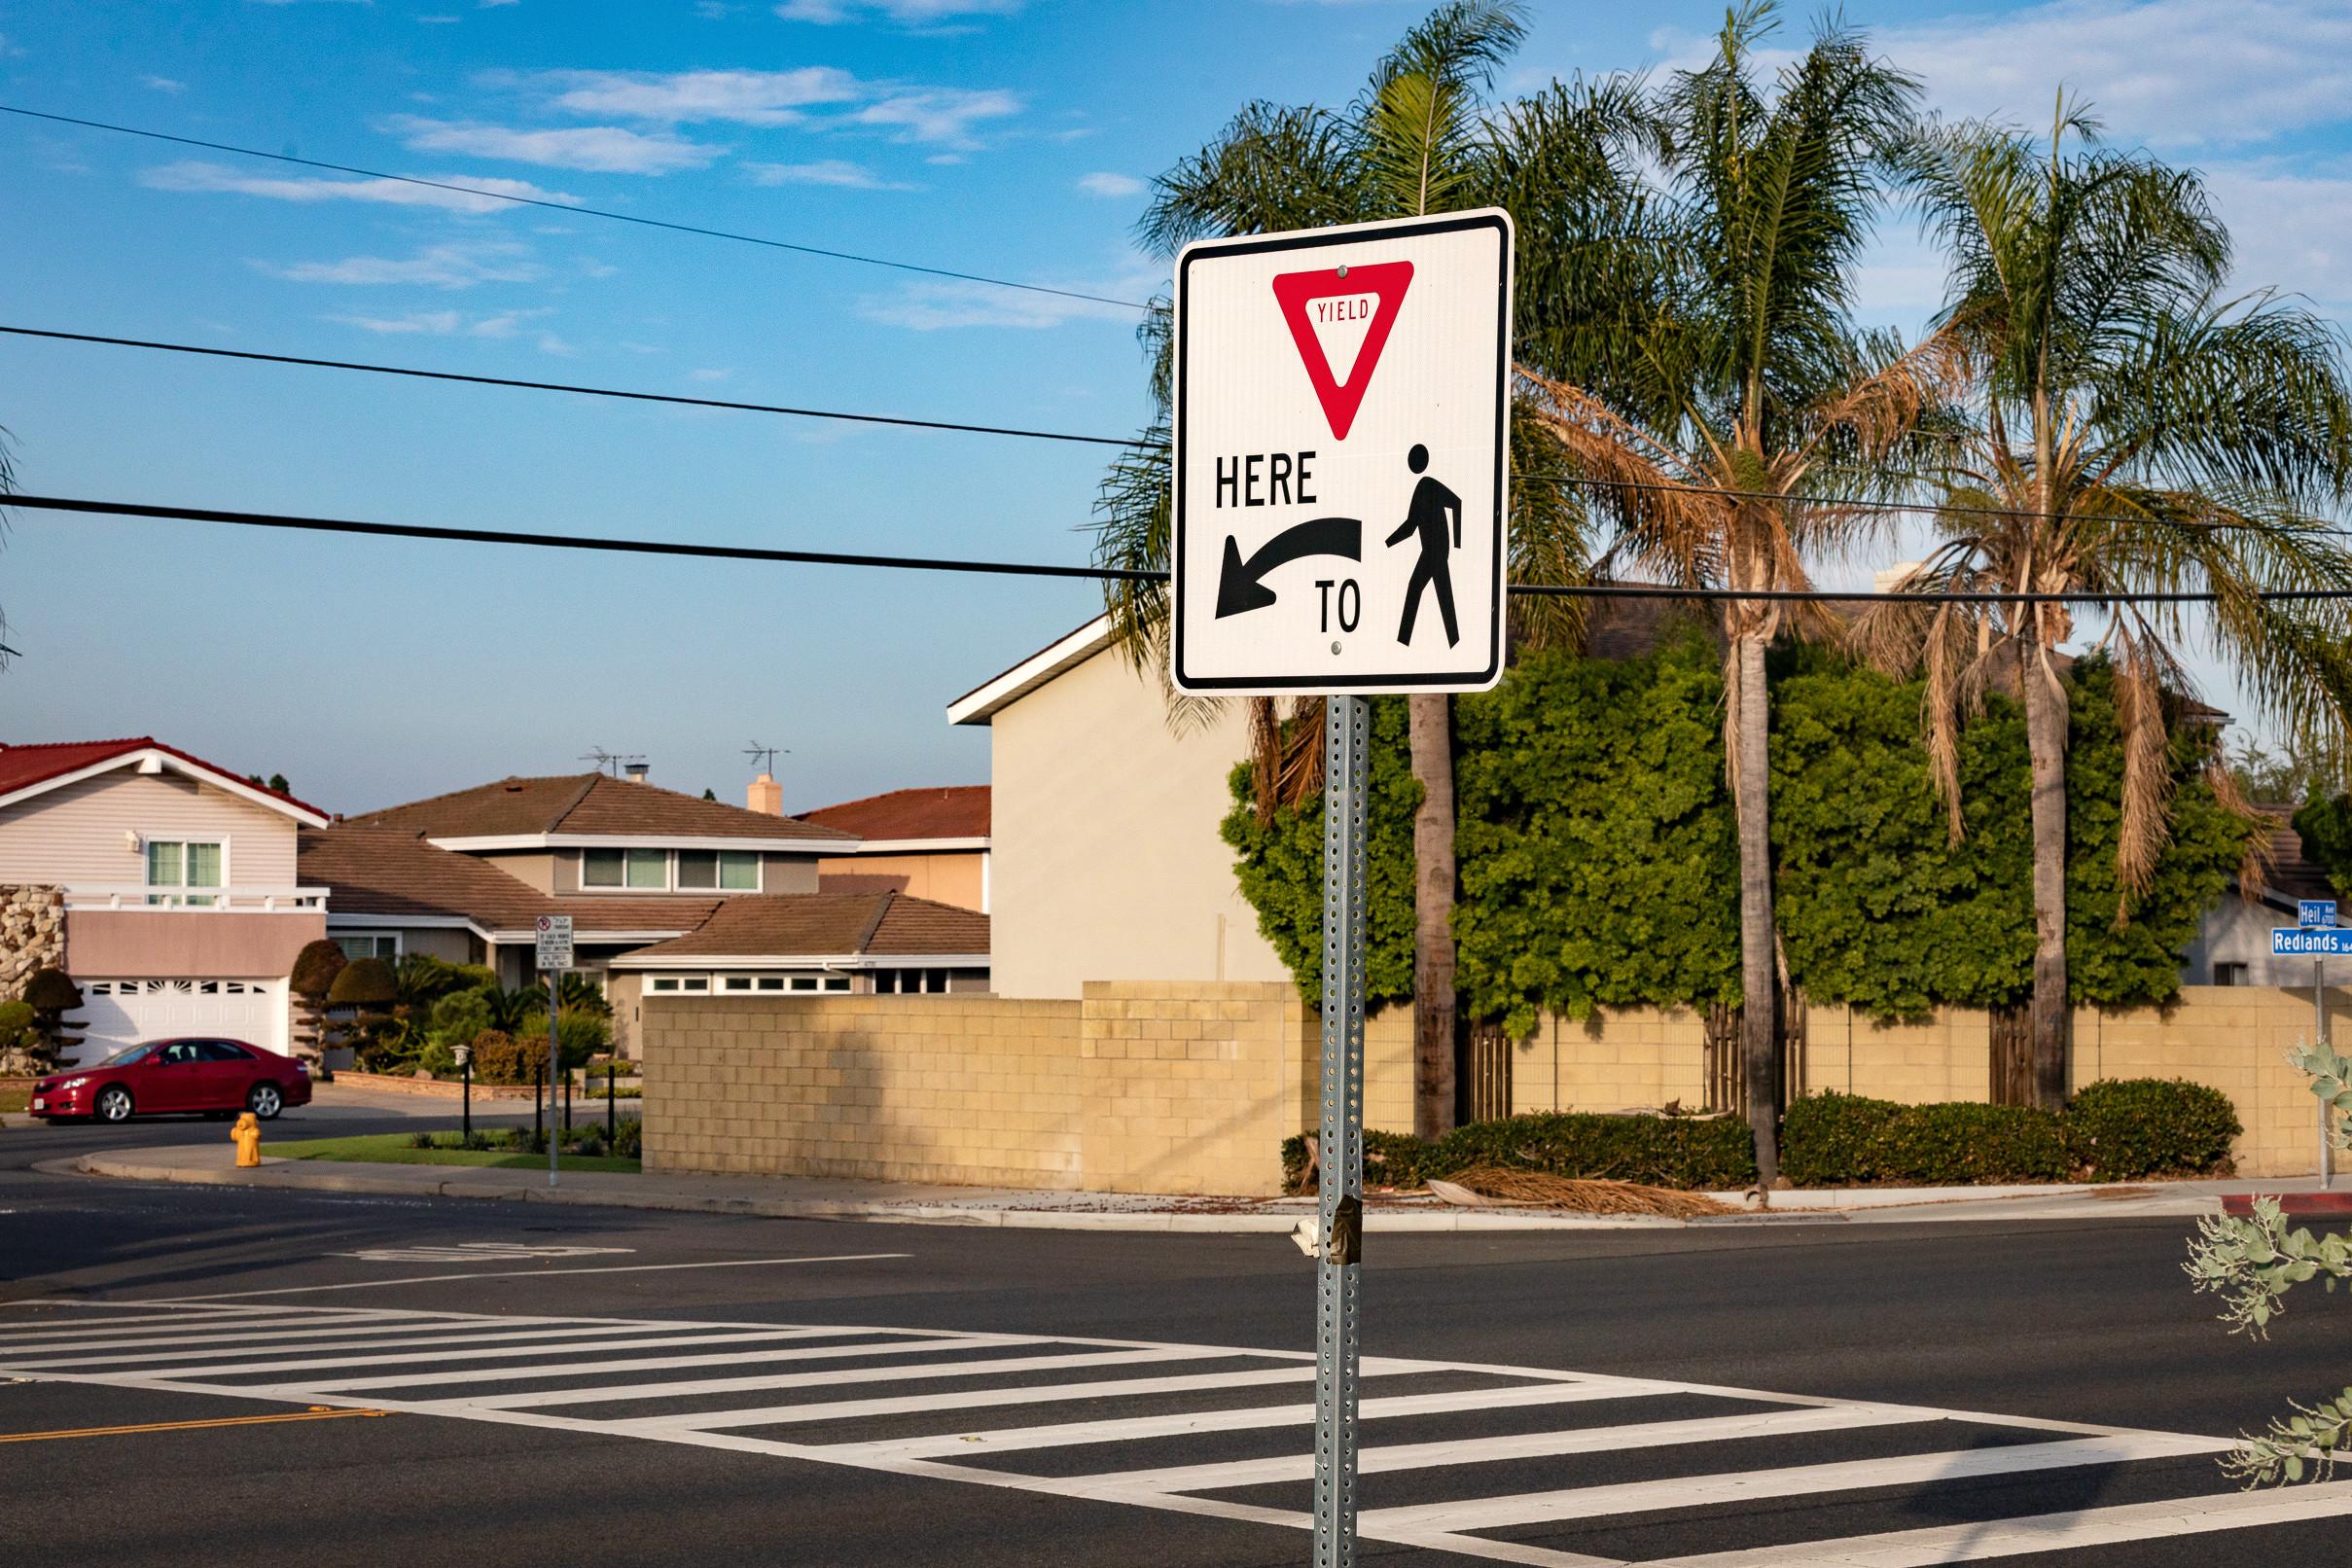 New California Law Bans Parking Within 20 Feet of Crosswalk